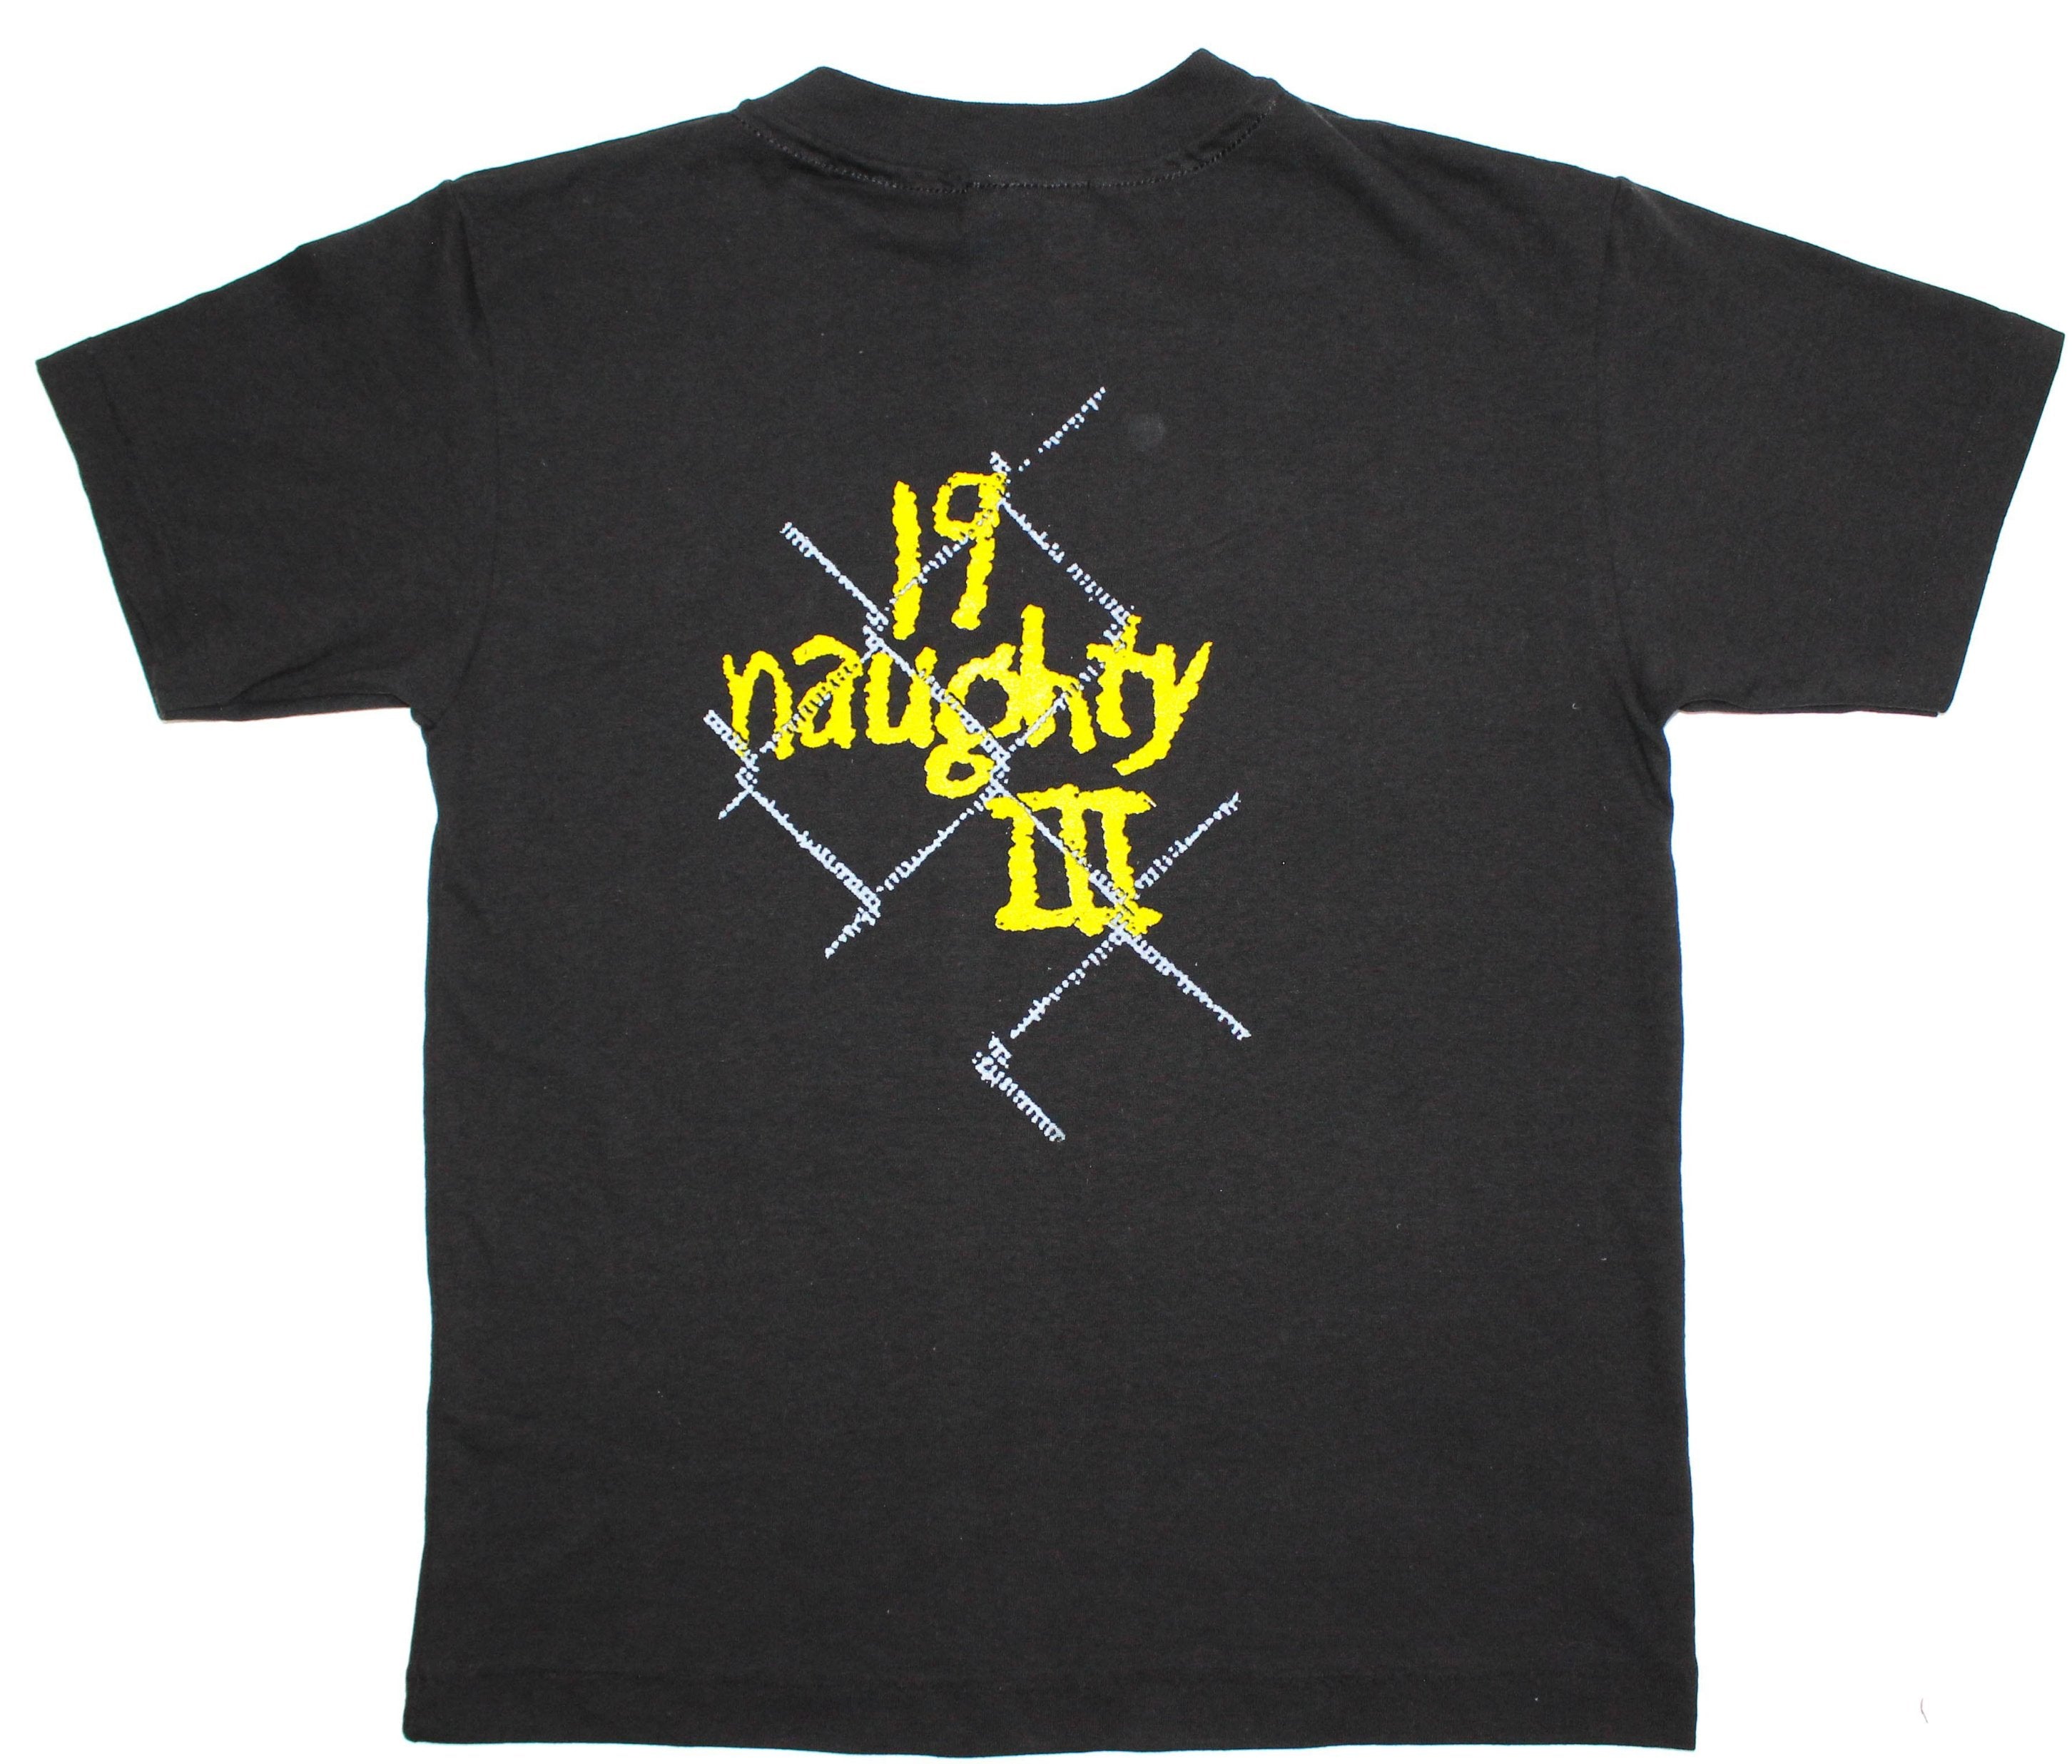 Naughty By Nature Reworked '93 '19 Naughty III' Youth M/L *1 of 1*